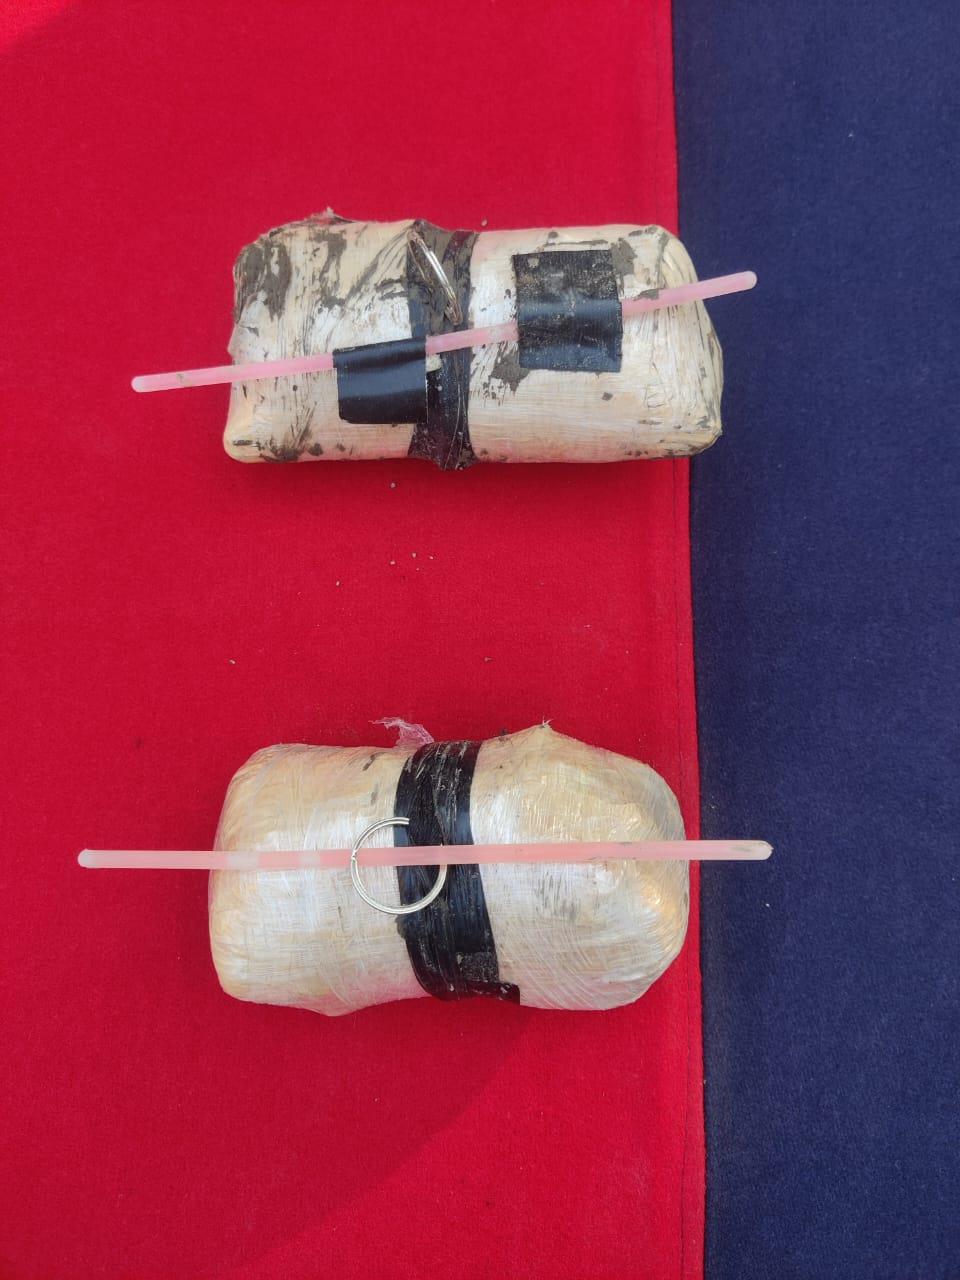 Security agencies seize 1 kg heroin near border in Amritsar sector